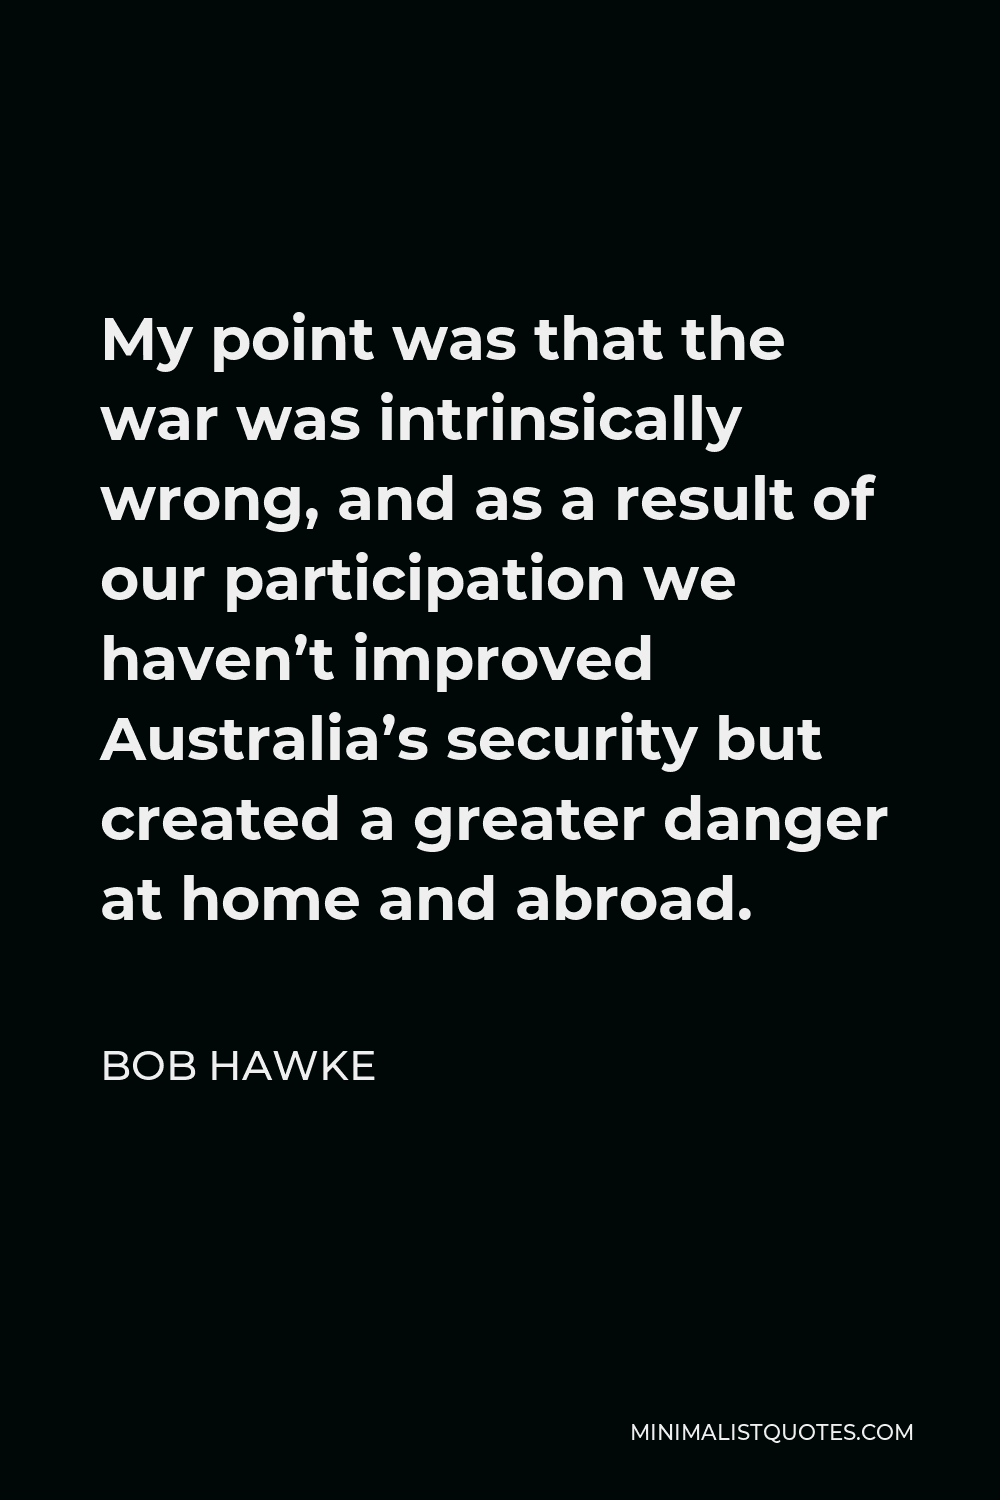 Bob Hawke Quote - My point was that the war was intrinsically wrong, and as a result of our participation we haven’t improved Australia’s security but created a greater danger at home and abroad.